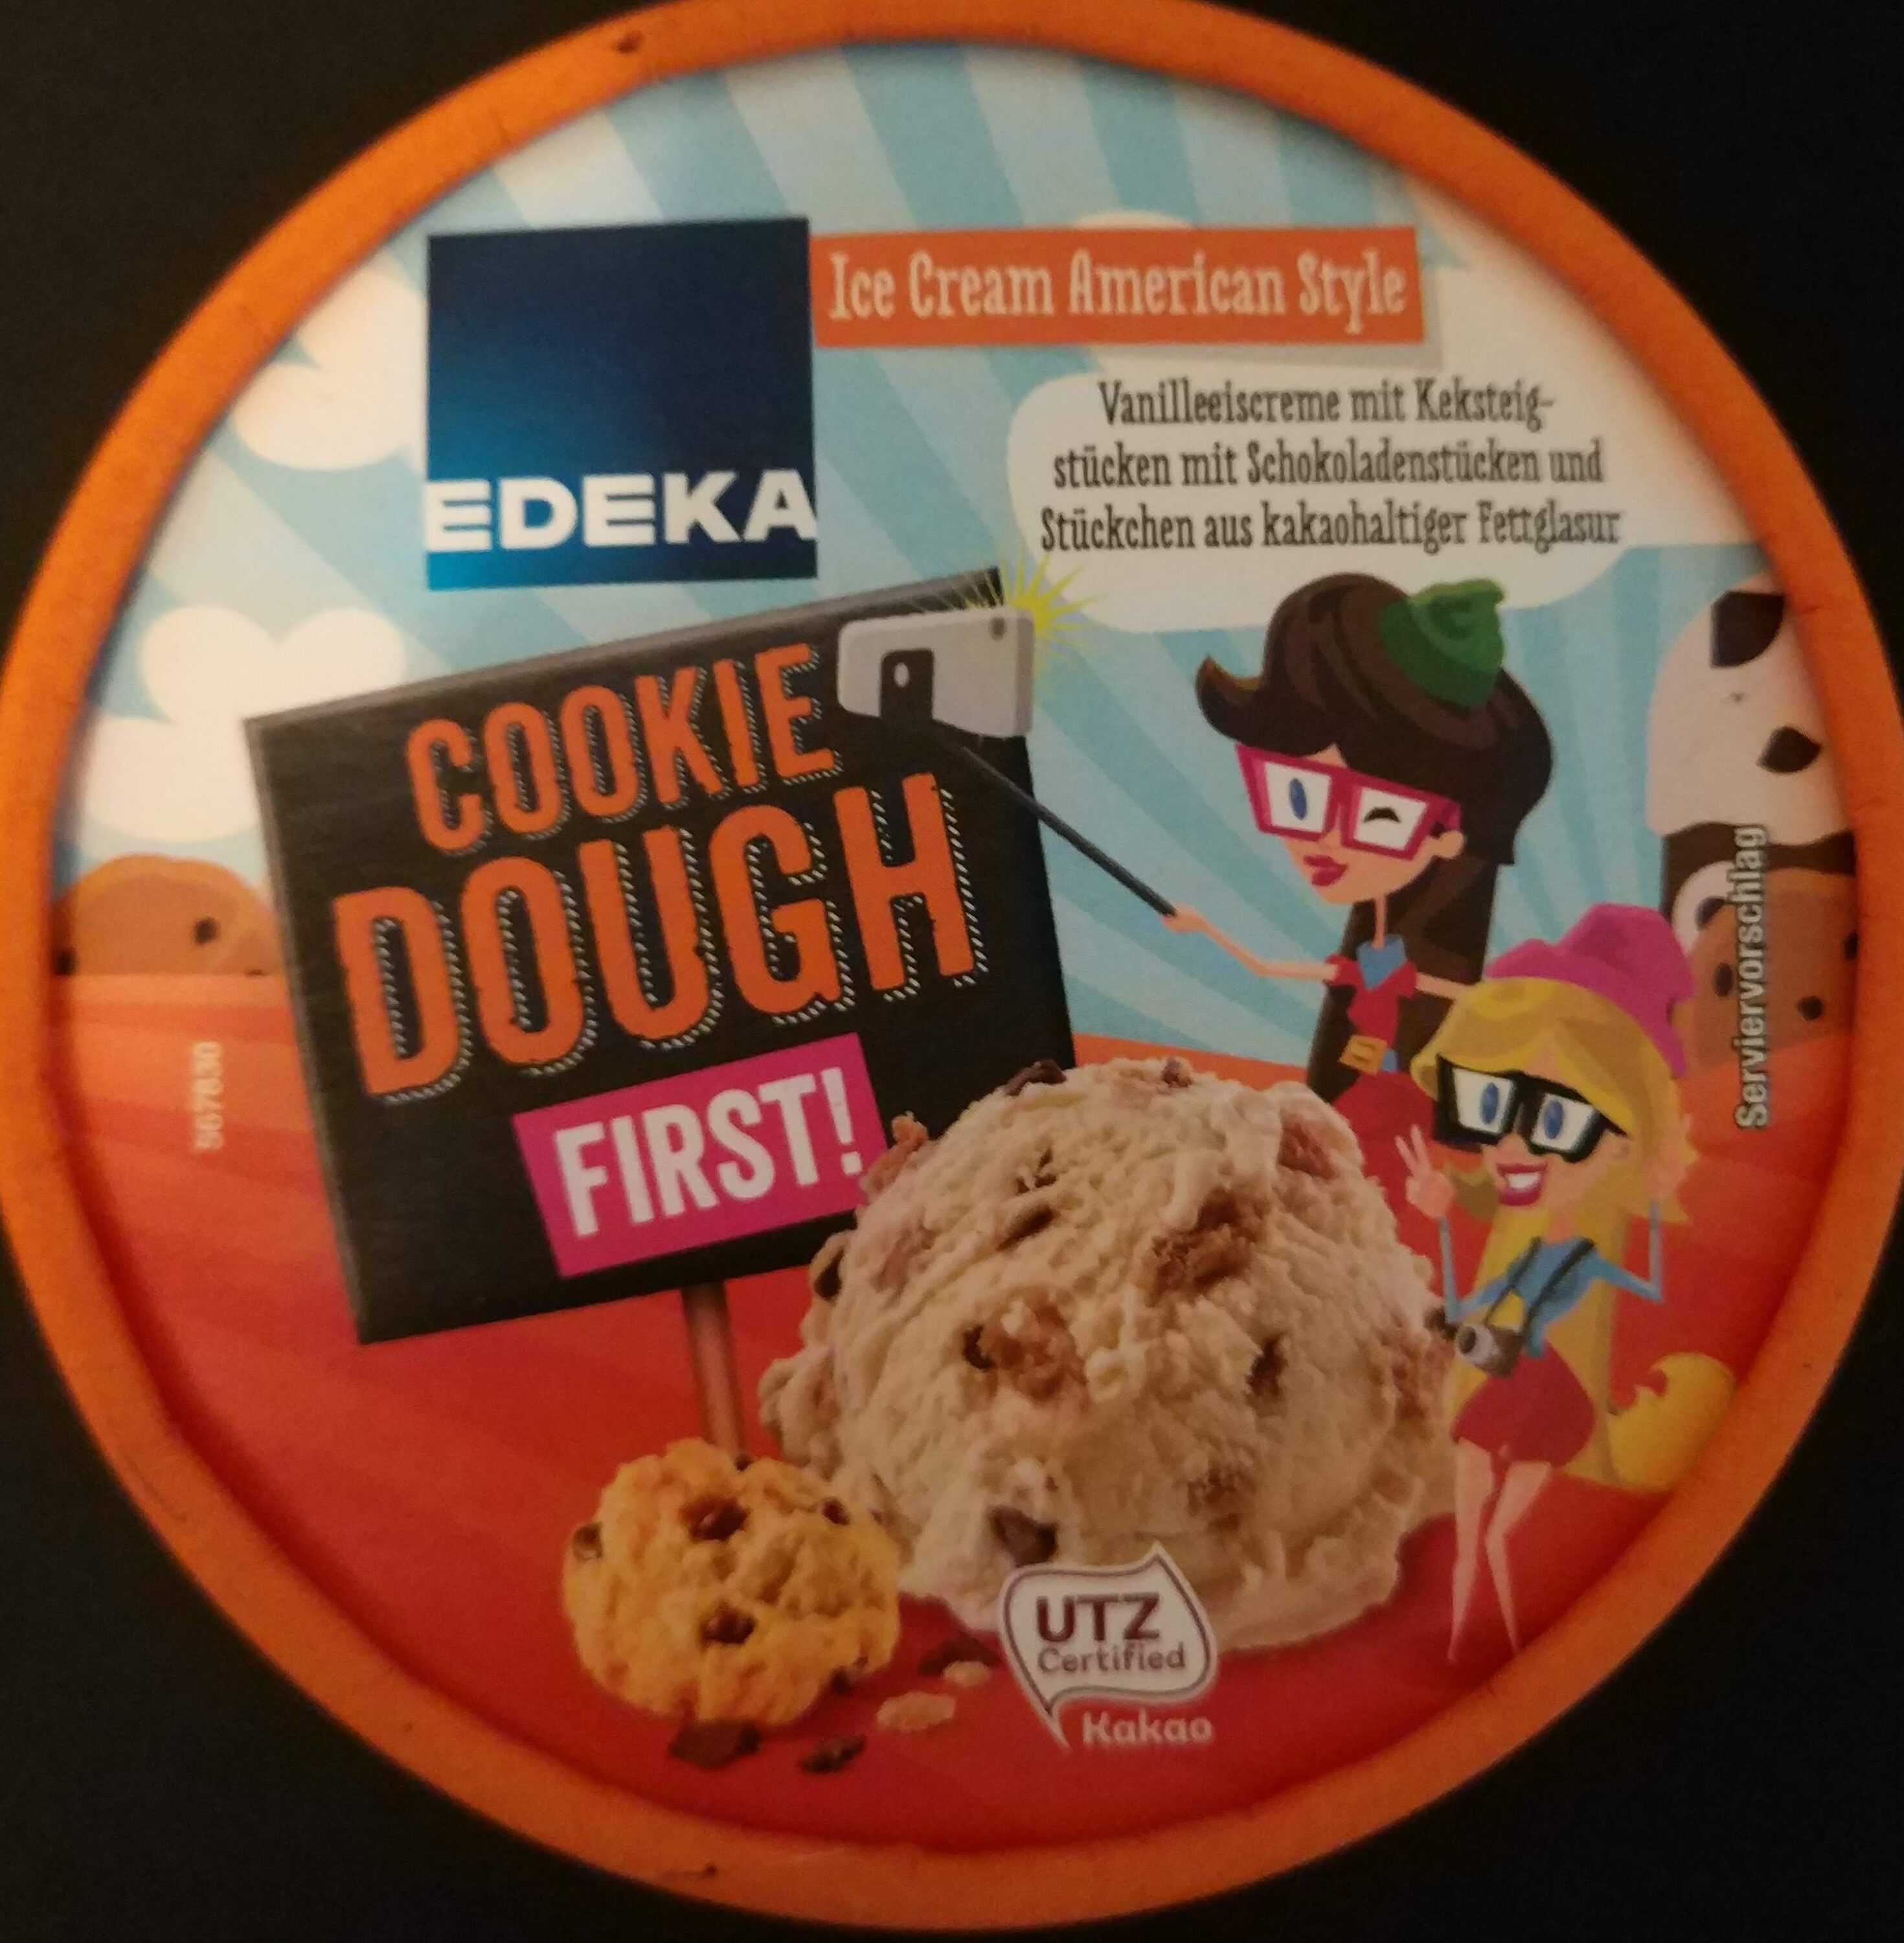 Ice Cream American Style "Cookie Dough First!" - Produkt